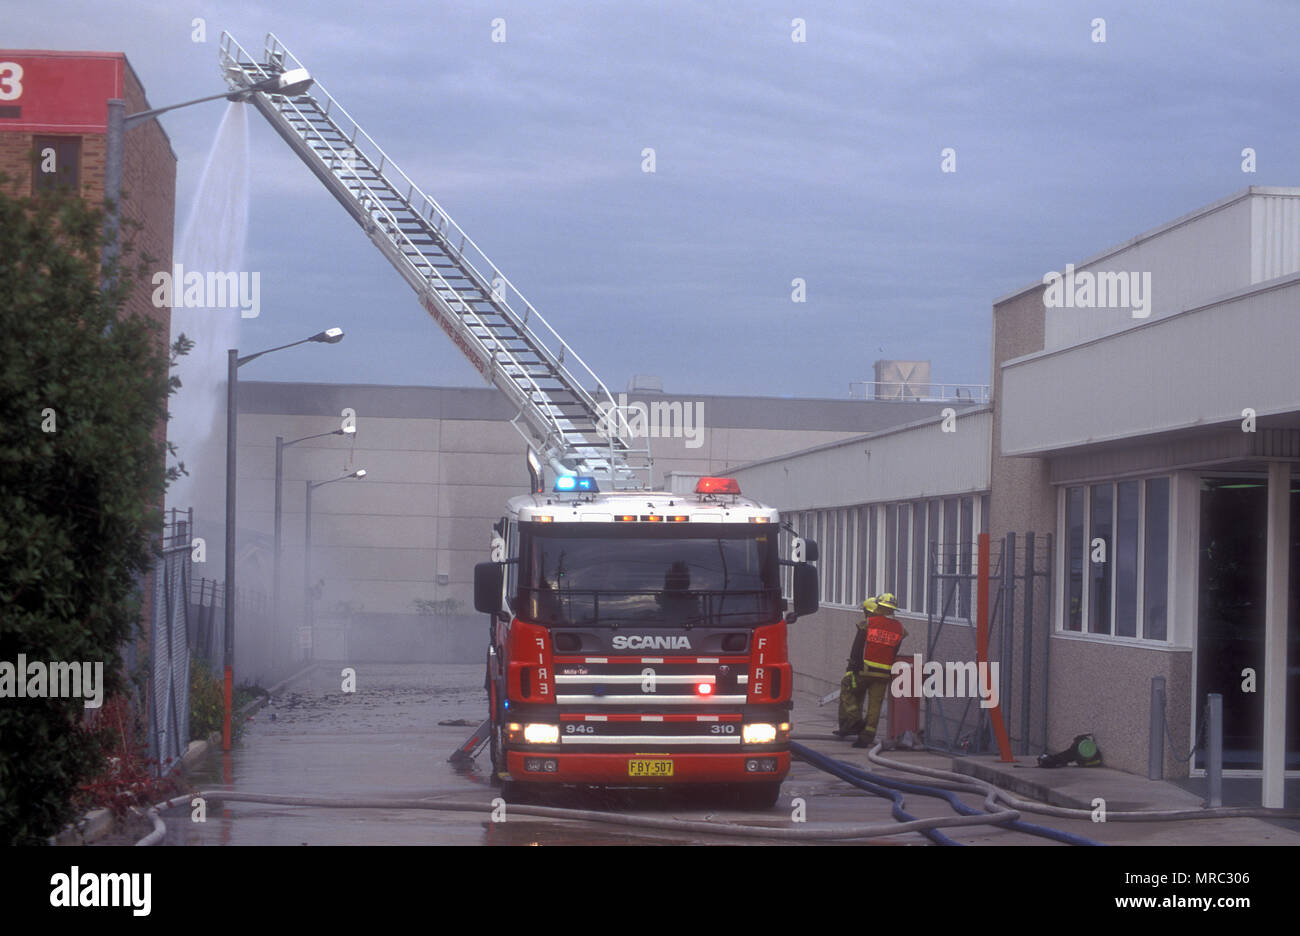 FIREMEN PUT OUT A FACTORY FIRE, SYDNEY, NEW SOUTH WALES, AUSTRALIA Stock Photo